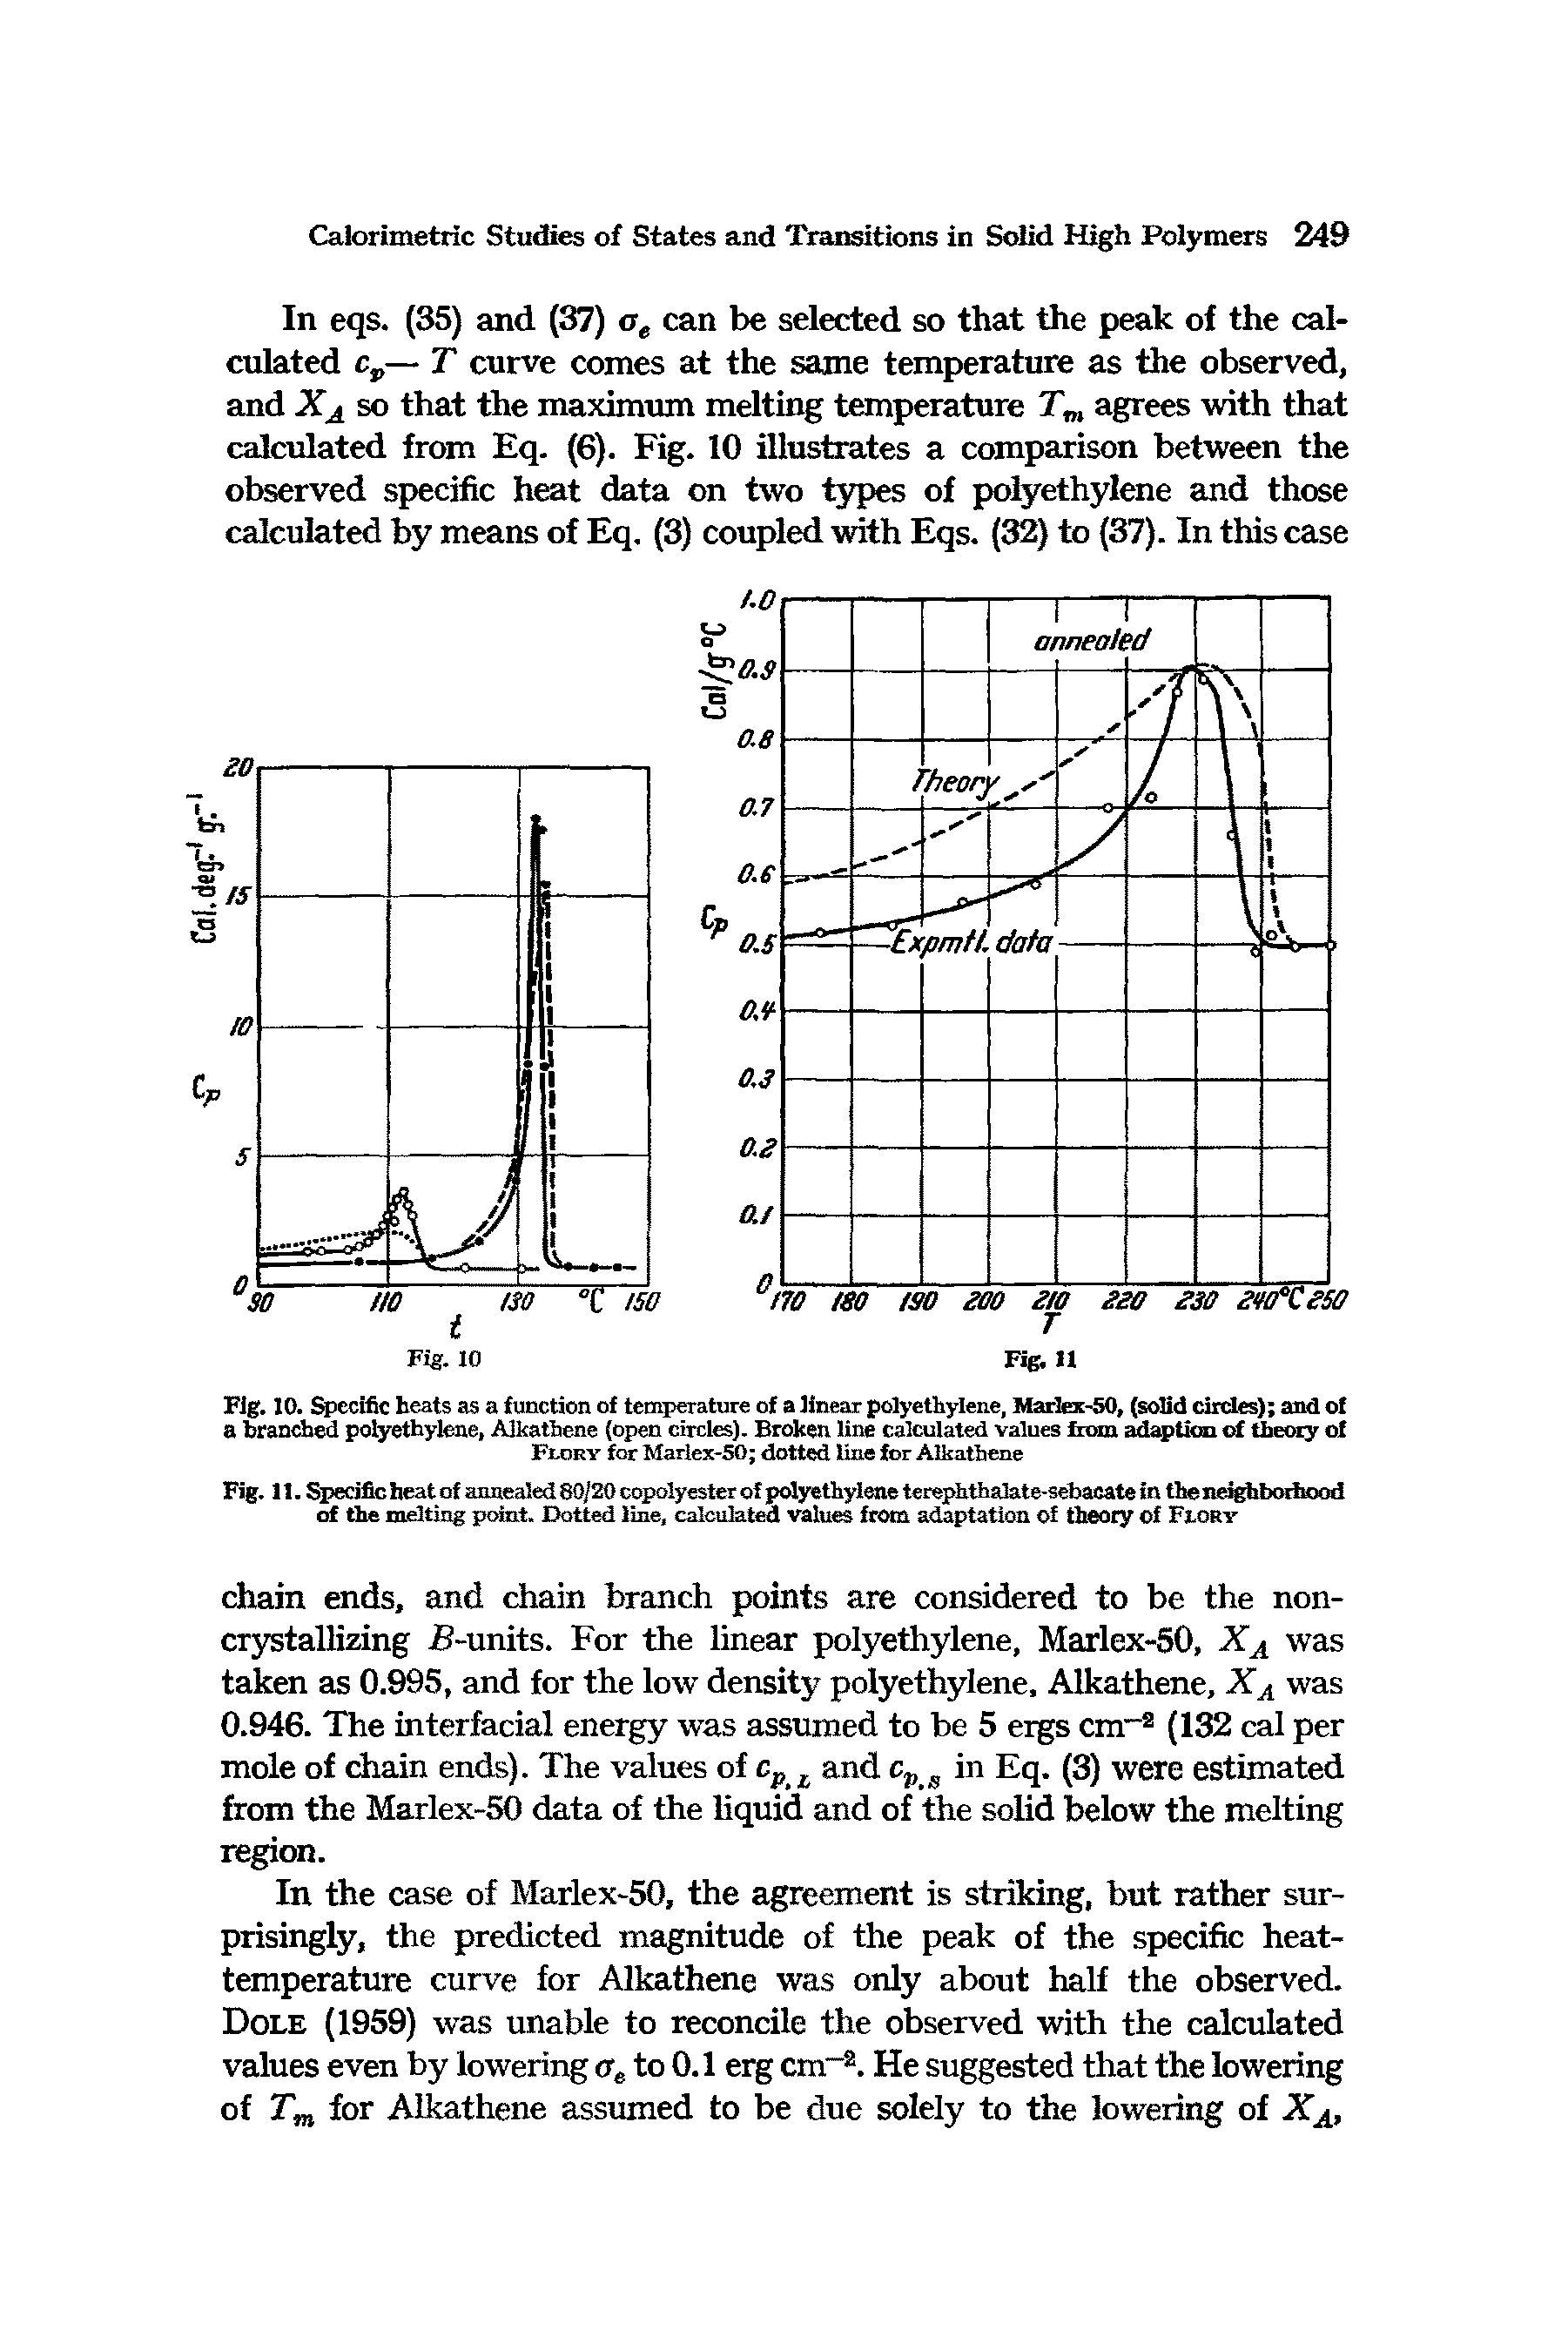 Fig. 11. Specific heat of annealed80/20 copolyester of polyethylene terephthalate-sebacate in the neighborhood of the melting point. Dotted line, calculated values from adaptation of theory of Feory...